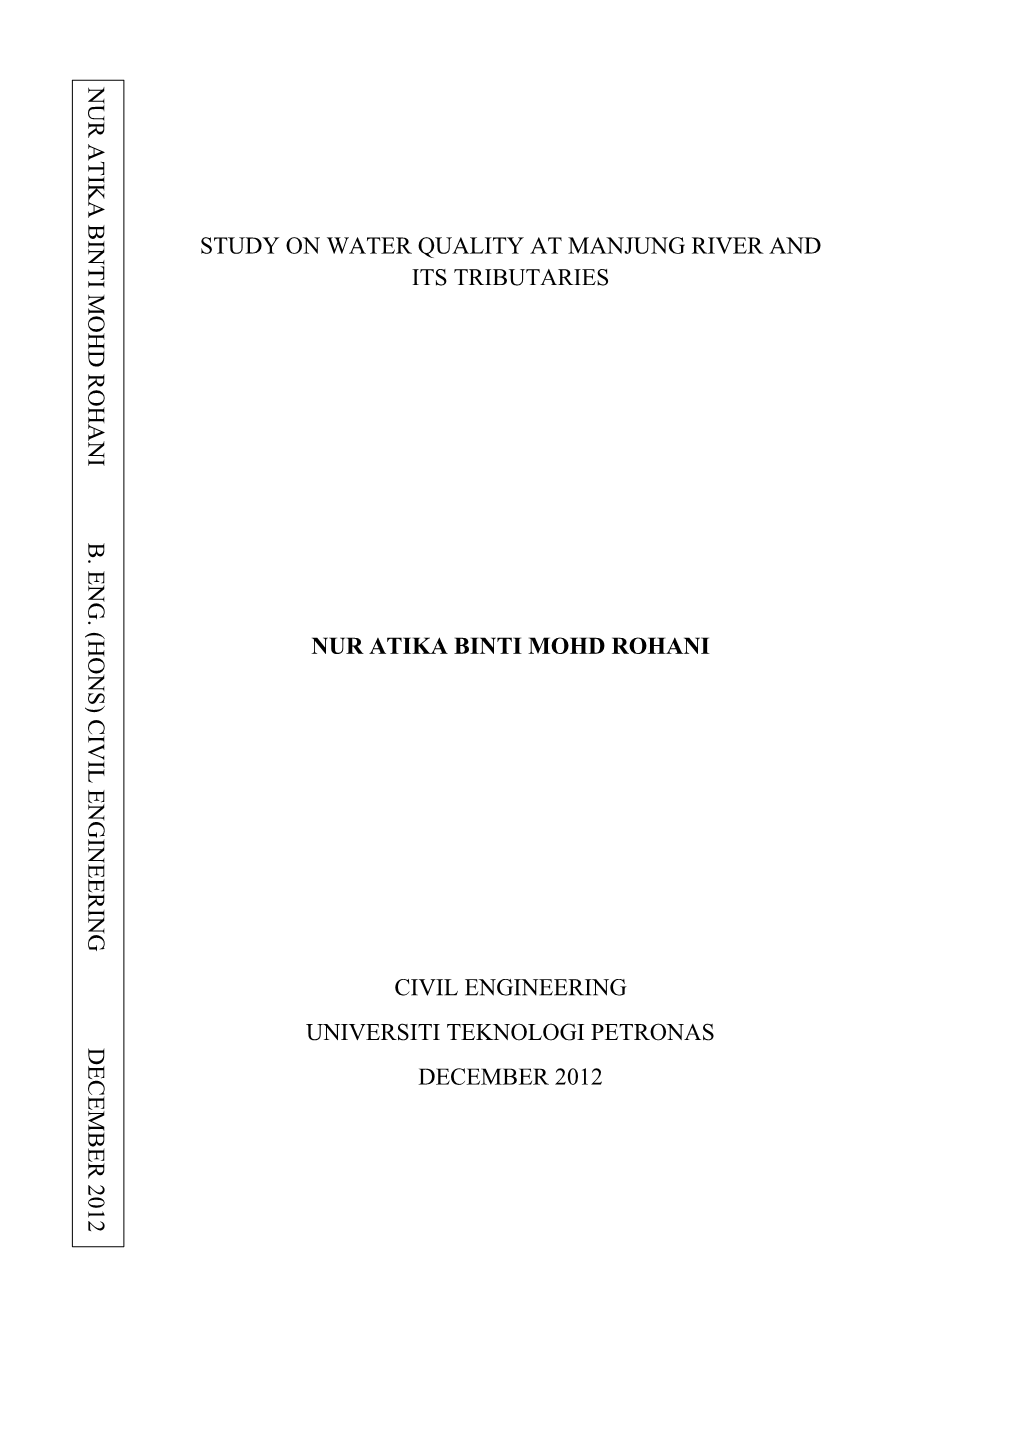 Study on Water Quality at Manjung River and Its Tributaries